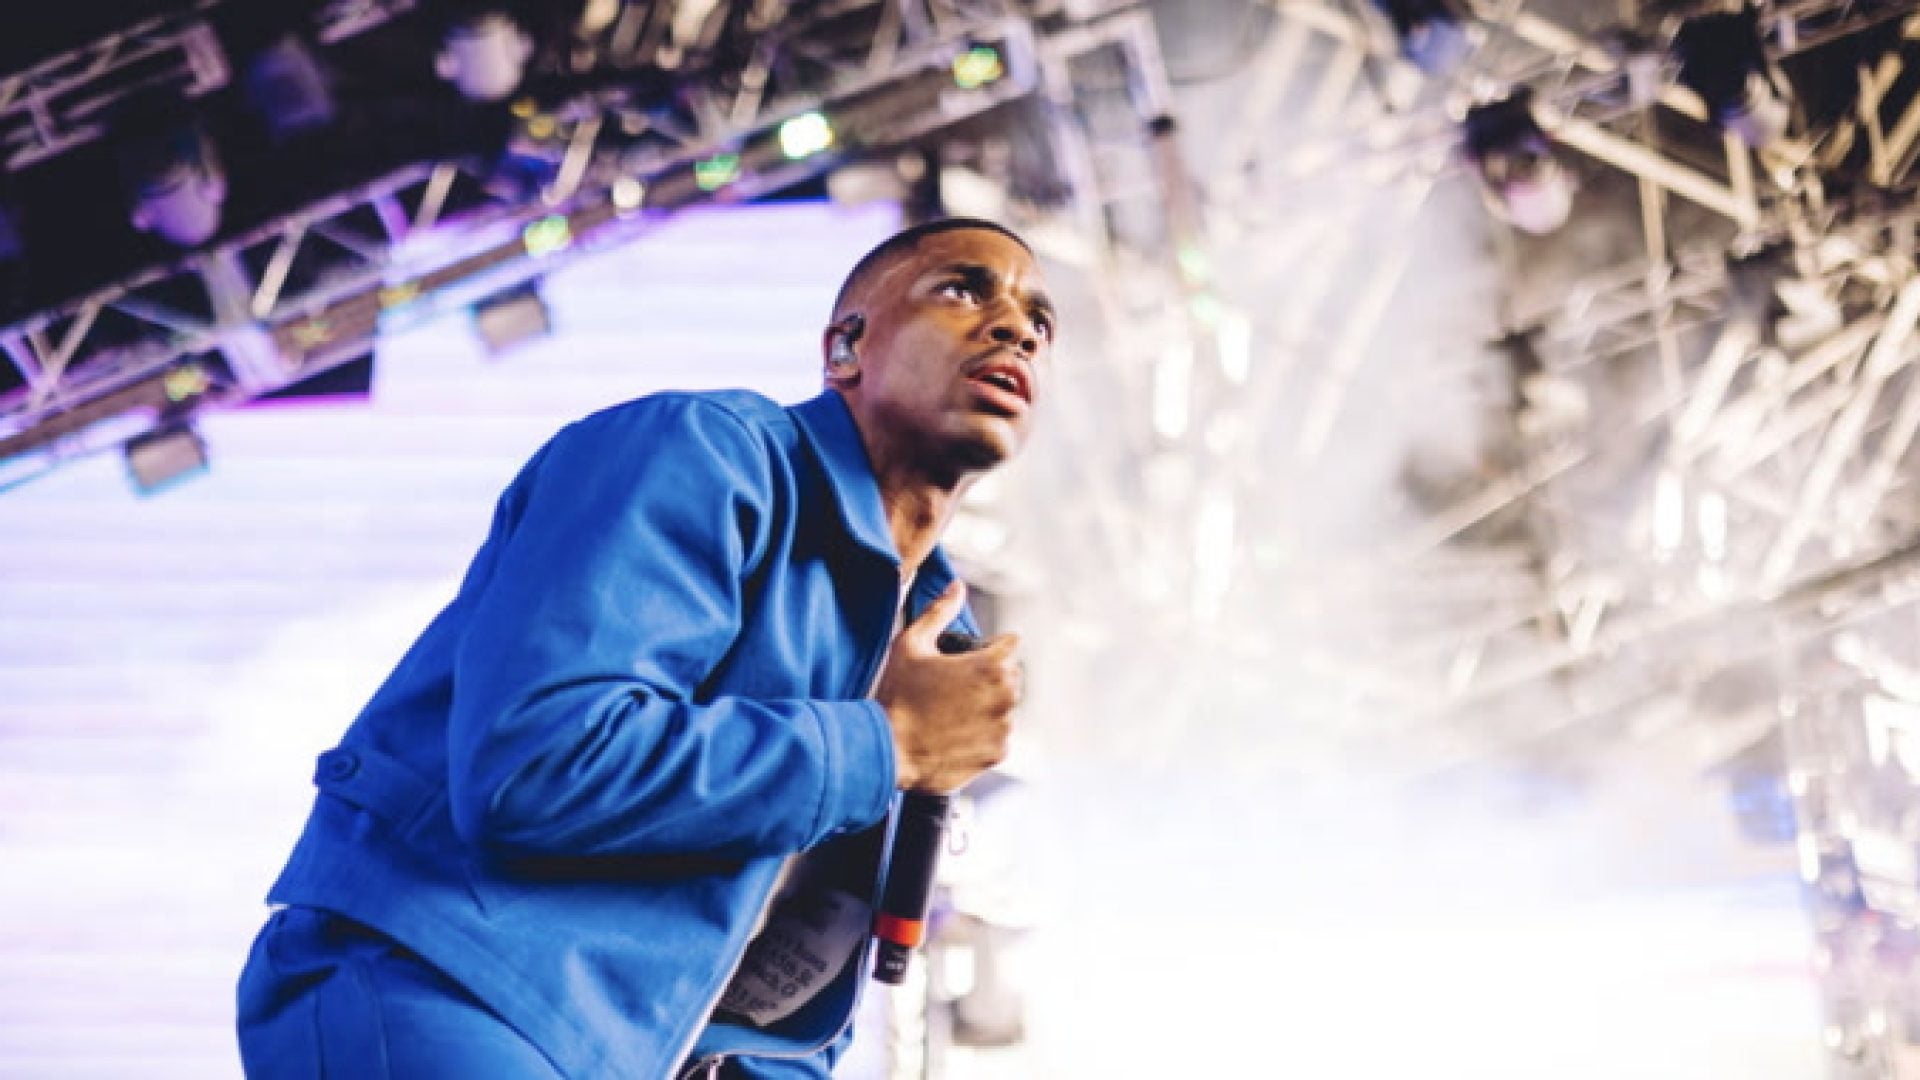 WATCH: Vince Staples Shares What He Wants His Legacy to Be